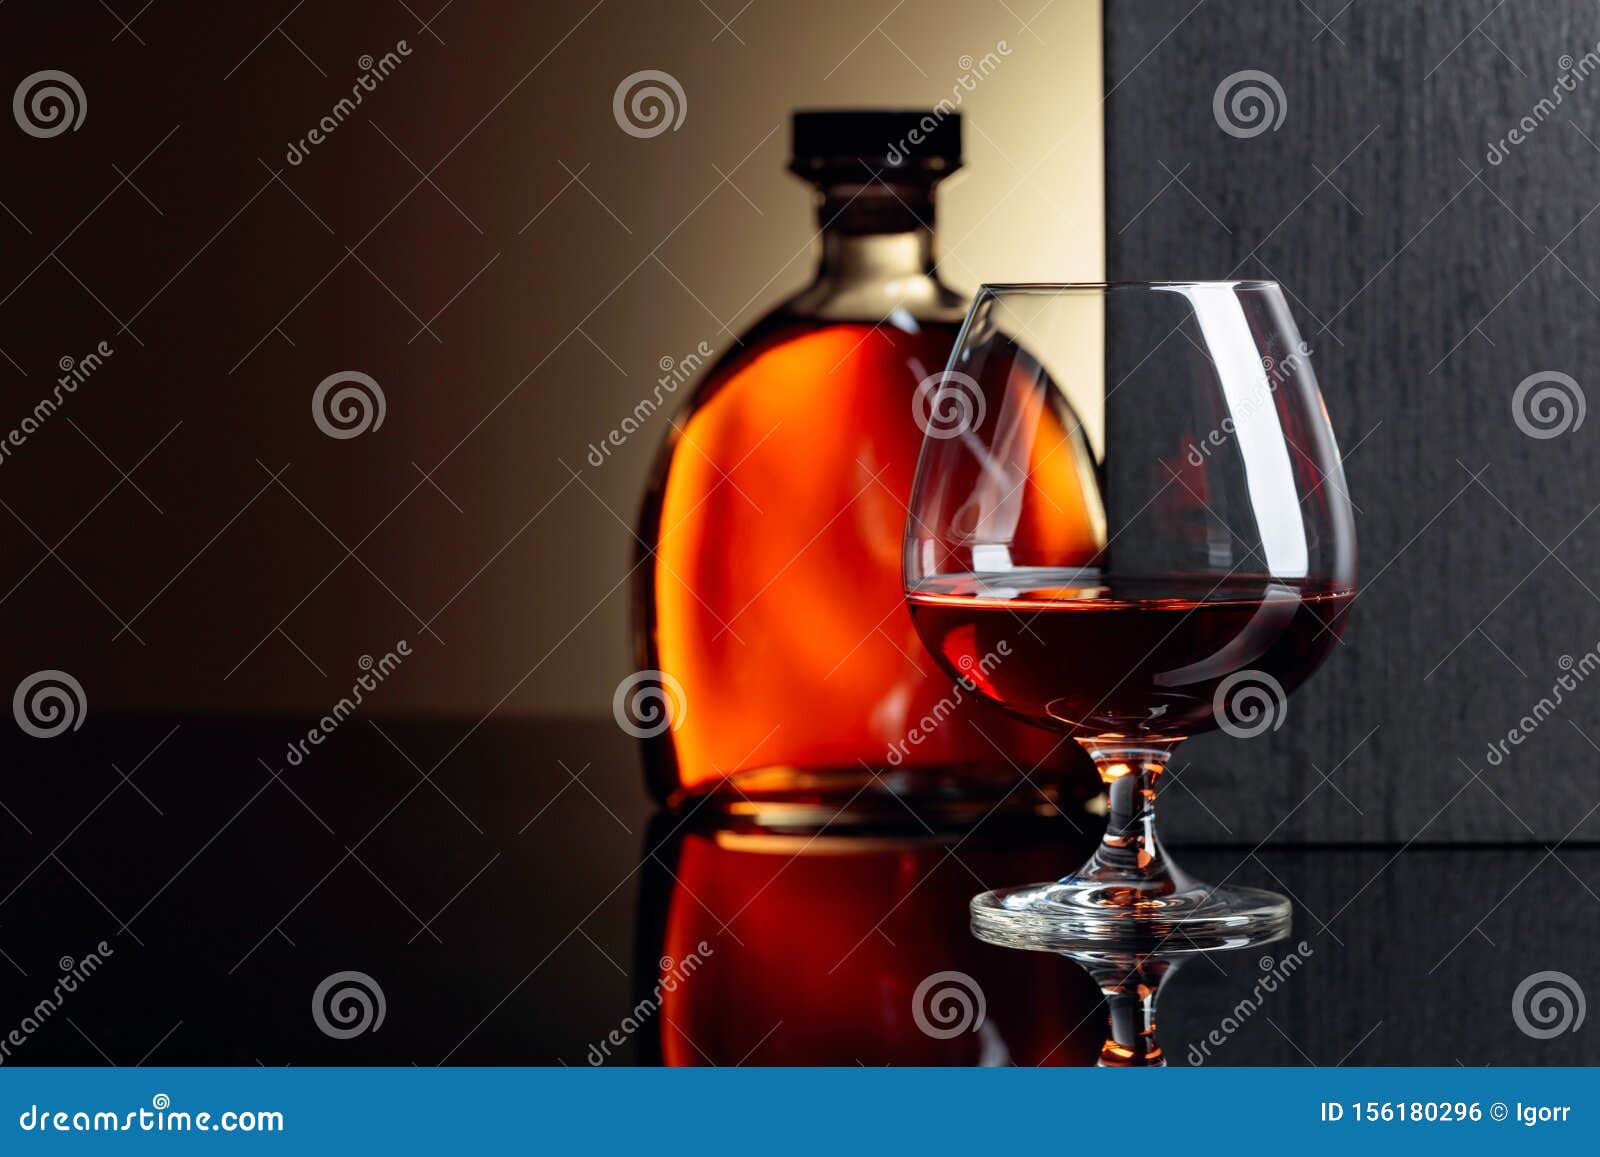 glass and bottle of brandy on a black reflective background